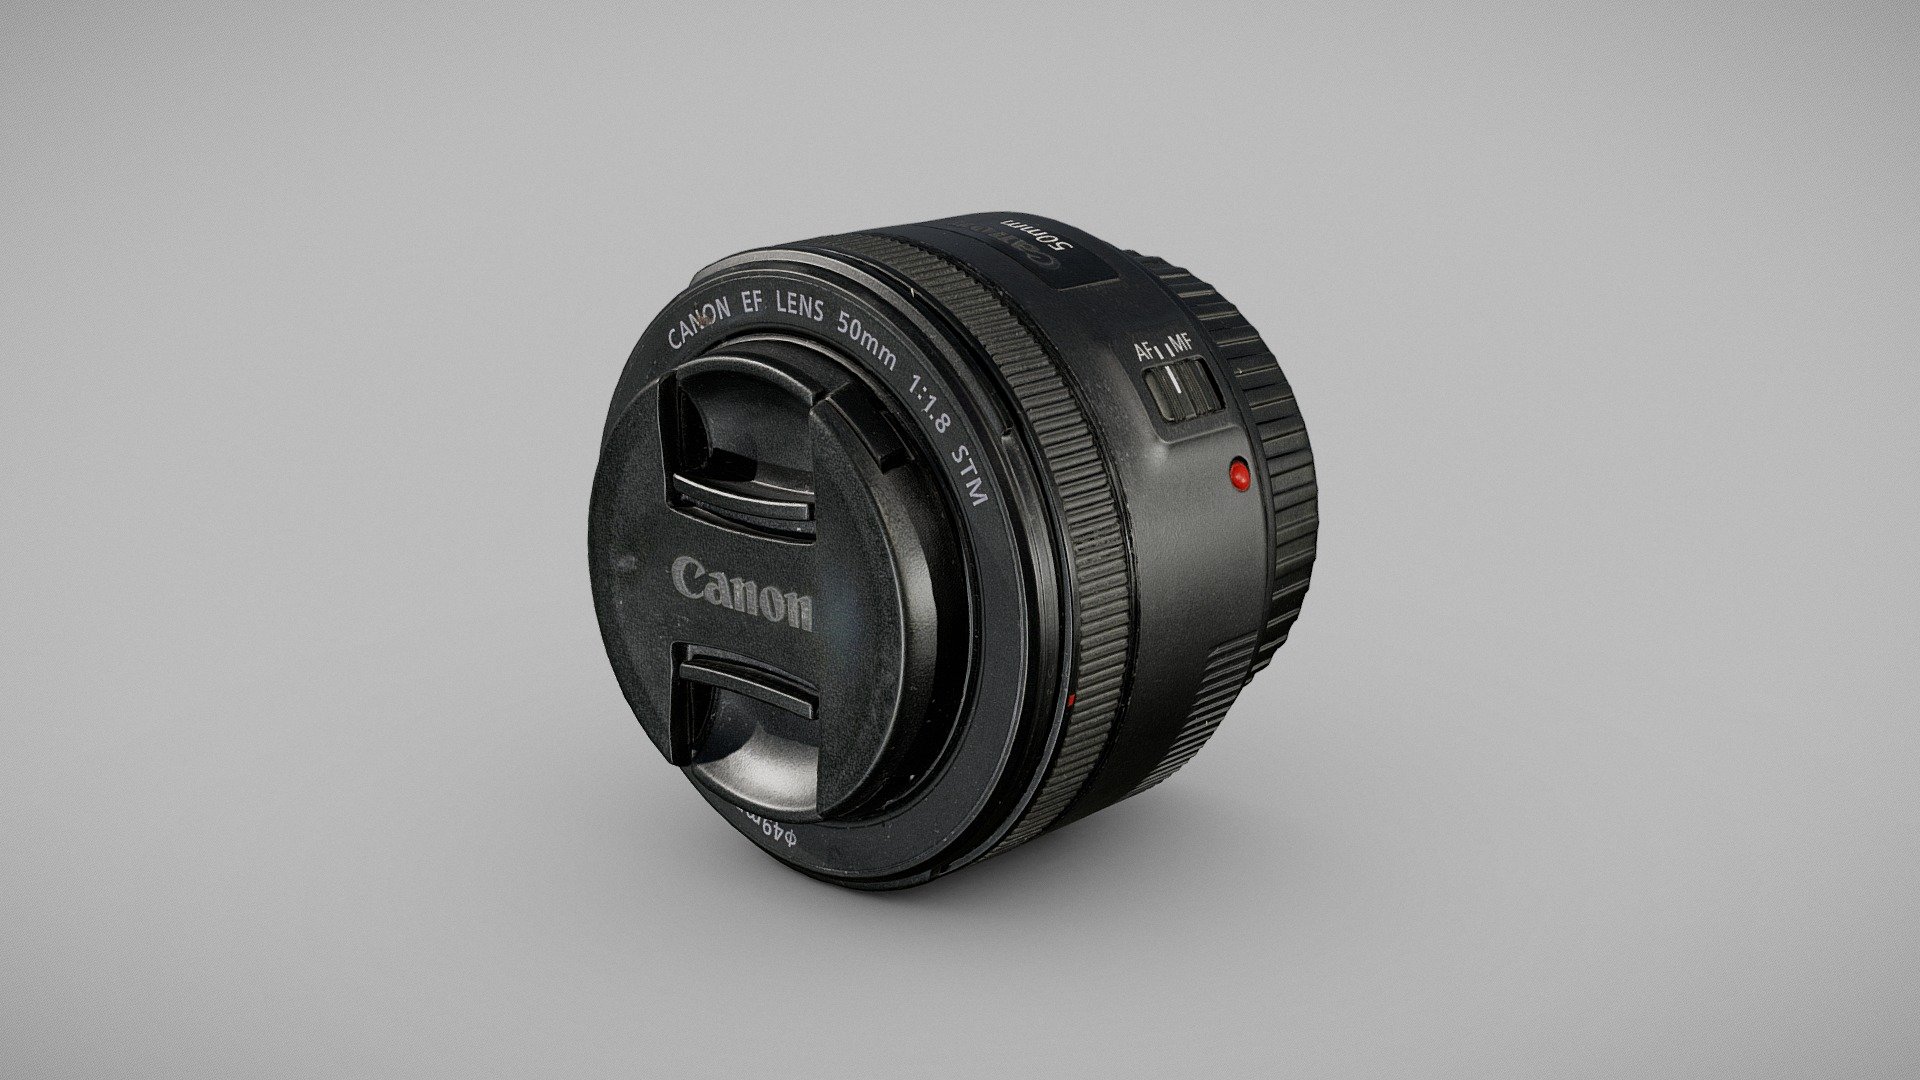 ** Canon EF 50mm **

Beaten-up Canon EF 50mm 1:1.8 STM Lens with caps.

6.3 x 6.9 x 6.9 cm (89 micrometers per texel @ 2k)

Scanned using advanced technology developed by inciprocal Inc. that enables highly photo-realistic reproduction of real-world products in virtual environments. Our hardware and software technology combines advanced photometry, structured light, photogrammtery and light fields to capture and generate accurate material representations from tens of thousands of images targeting real-time and offline path-traced PBR compatible renderers.

Zip file includes low-poly OBJ mesh (in meters) with a set of 2k PBR textures compressed with lossless JPEG (no chroma sub-sampling) 3d model